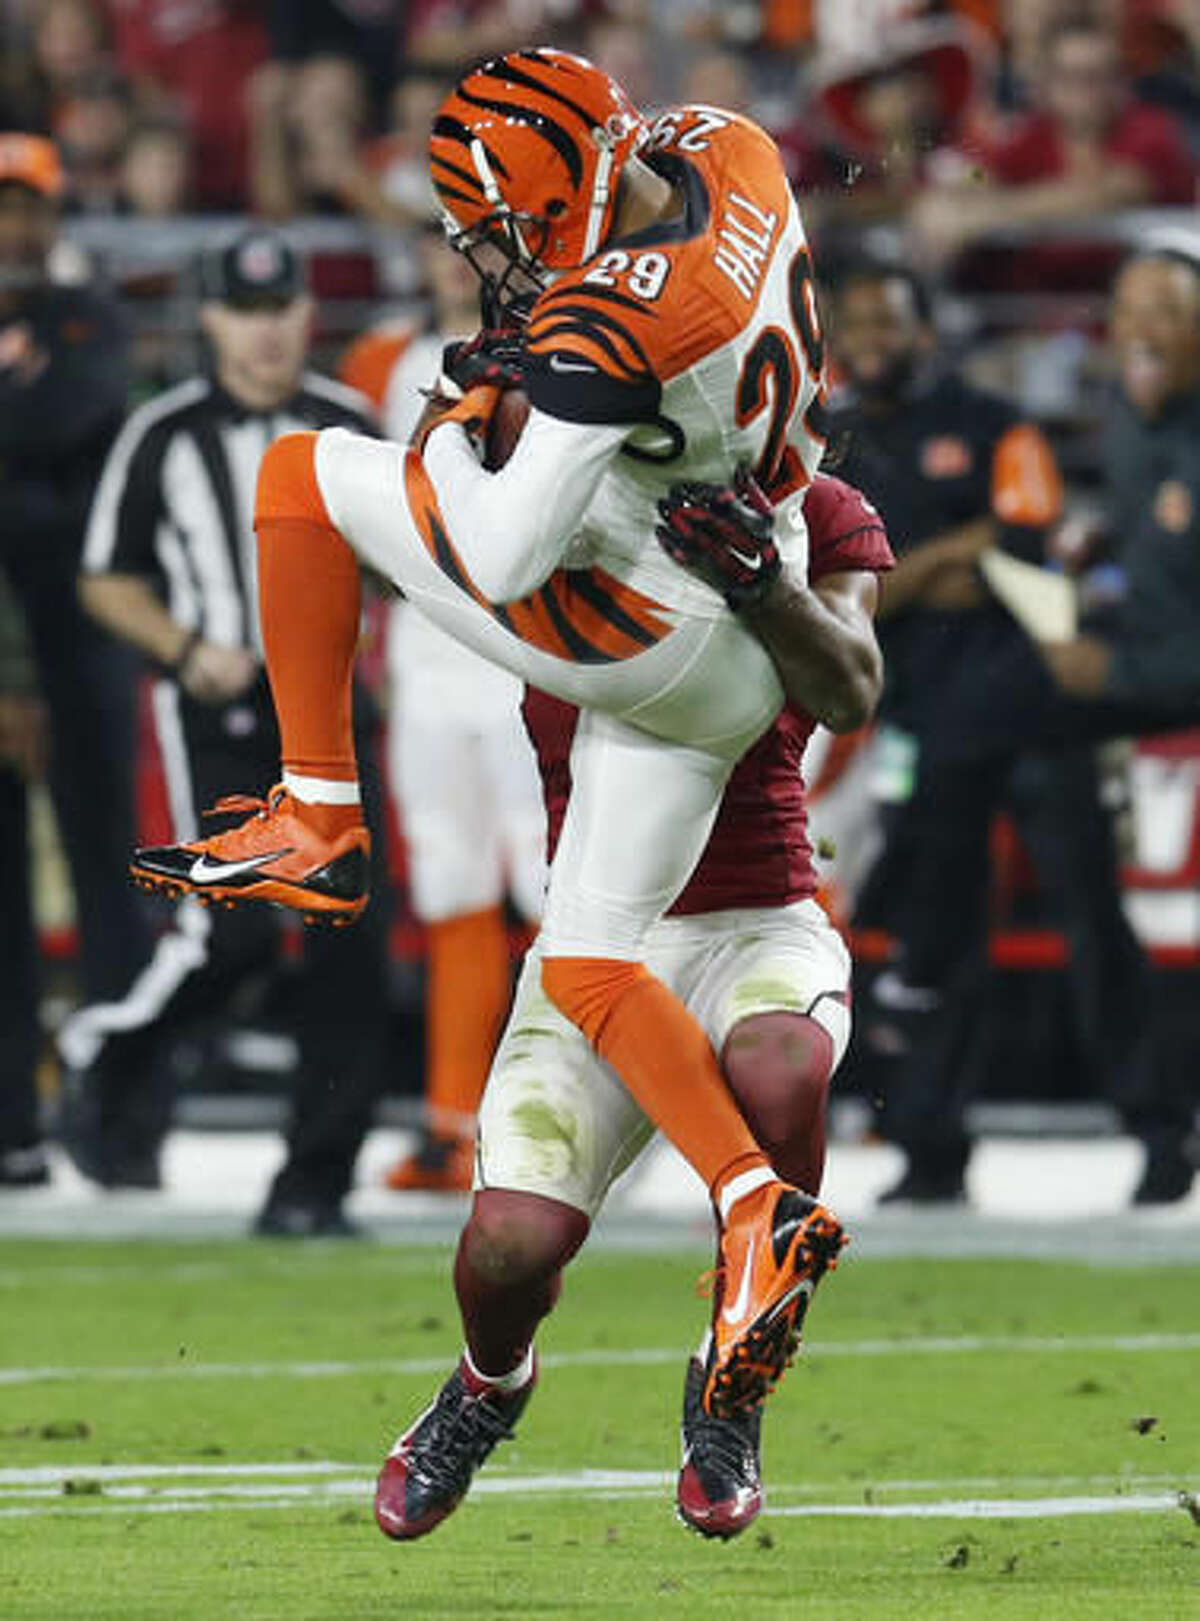 FILE - In this Nov. 22, 2015, file photo, Cincinnati Bengals strong safety Leon Hall (29) intercepts a pass intended for Arizona Cardinals wide receiver Larry Fitzgerald (11) during the first half of an NFL football game, in Glendale, Ariz. The New York Giants have signed cornerback Leon Hall, giving them a veteran who knows how to play in the slot in passing situations. The Giants announced the signing Thursday, Aug. 4, 2016. (AP Photo/Rick Scuteri, File)